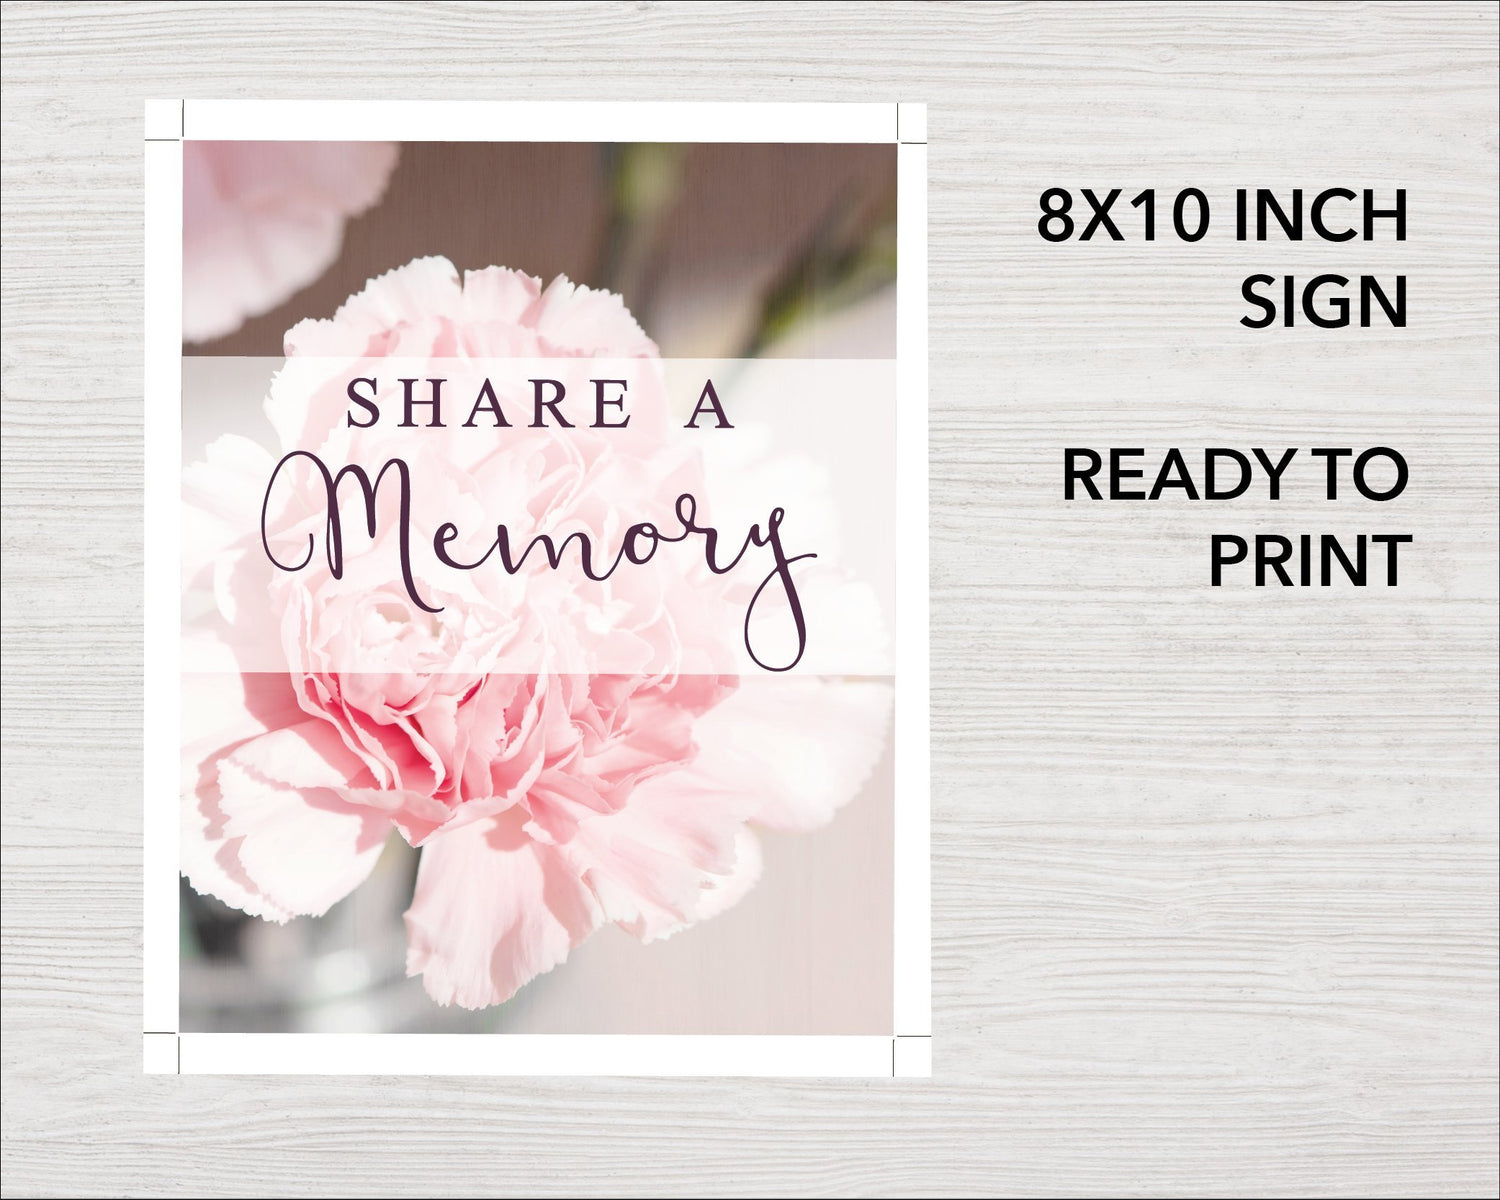 Pink Carnations Share a Memory Sign and Cards